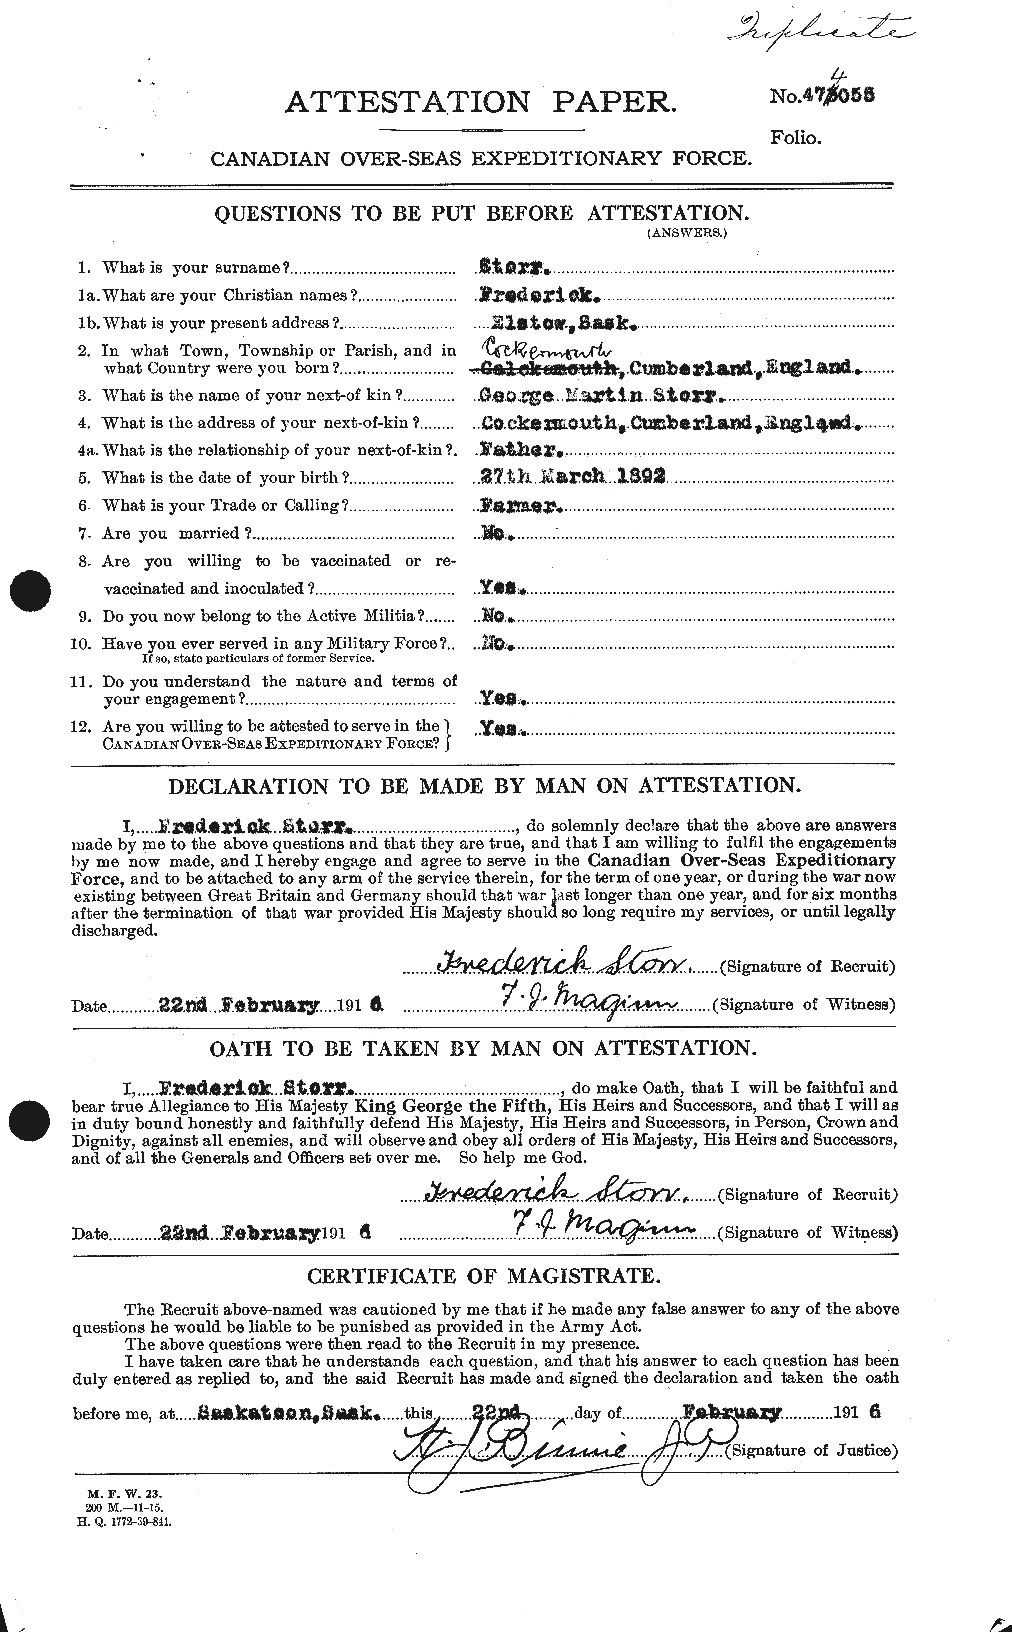 Personnel Records of the First World War - CEF 623006a